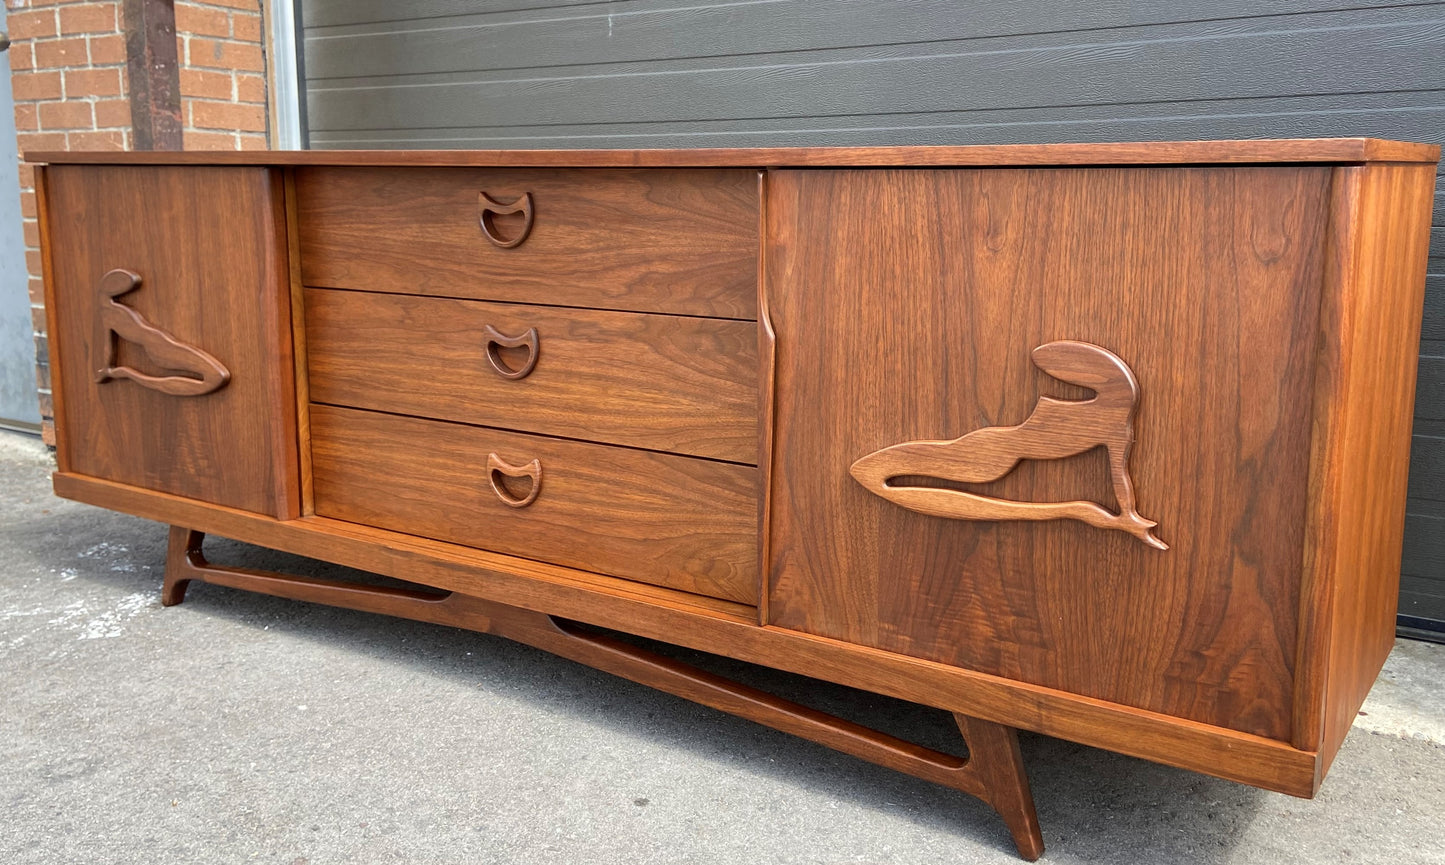 REFINISHED MCM Walnut Credenza or Dresser with sliding doors, PERFECT